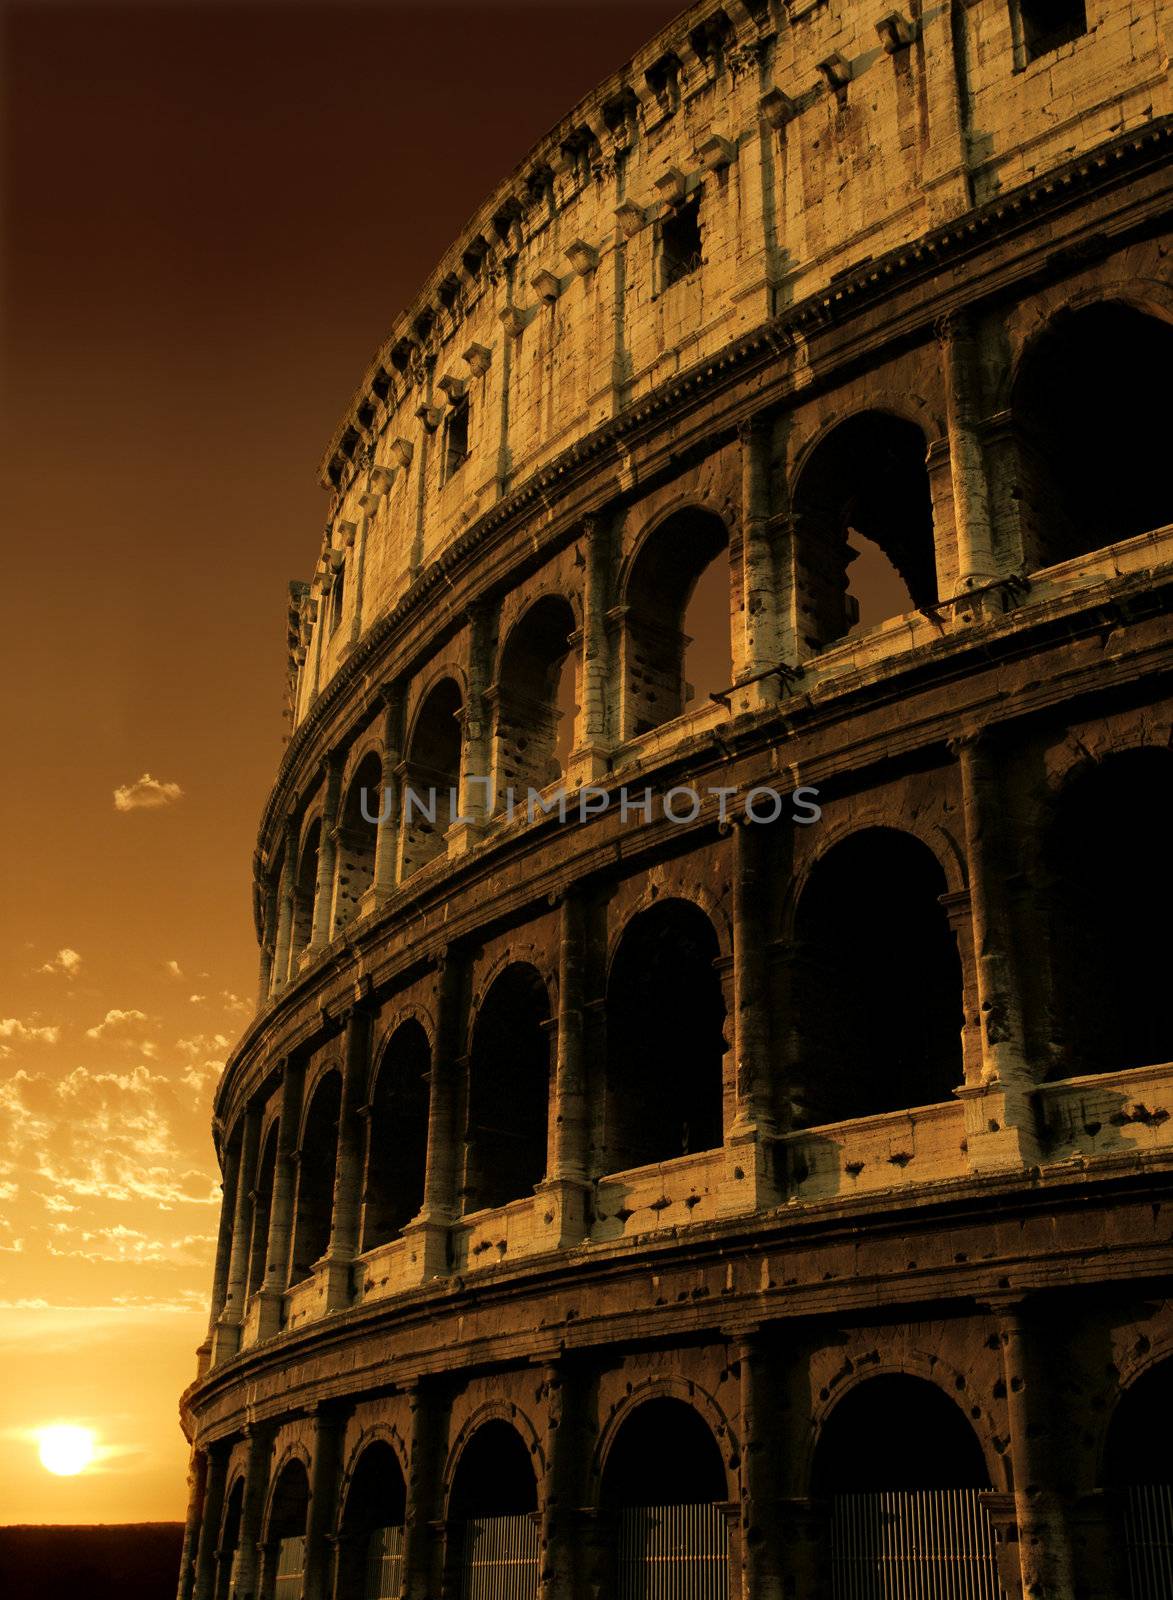 The Colosseum in Rome, Italy during a sunrise.
